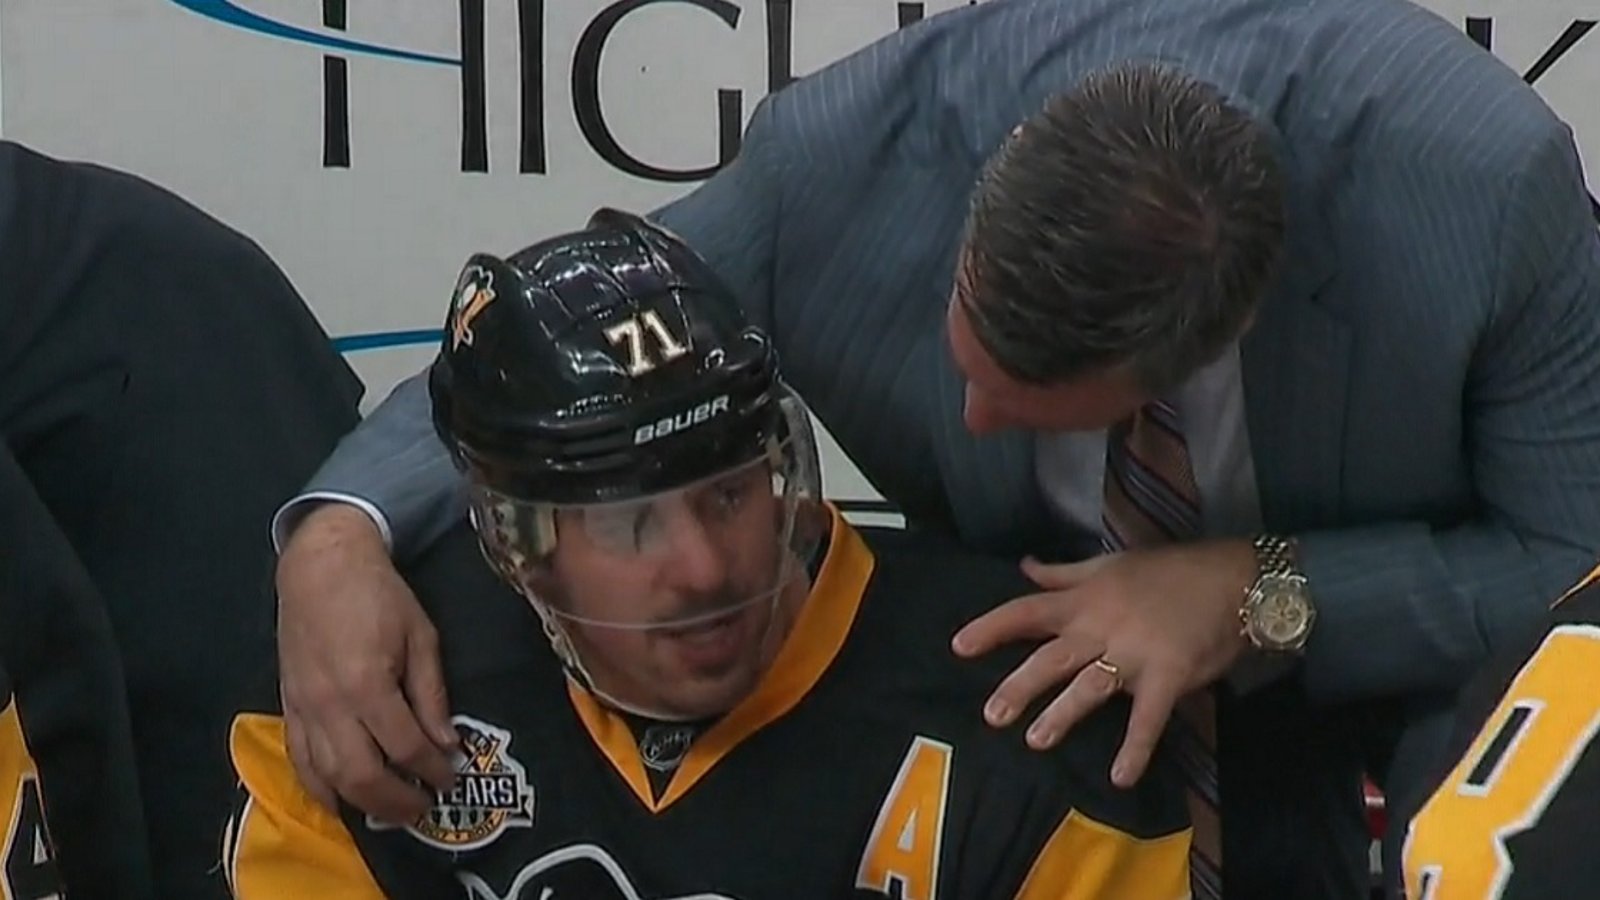 Breaking: Kessel and Malkin not happy with each other, coach has to get involved.